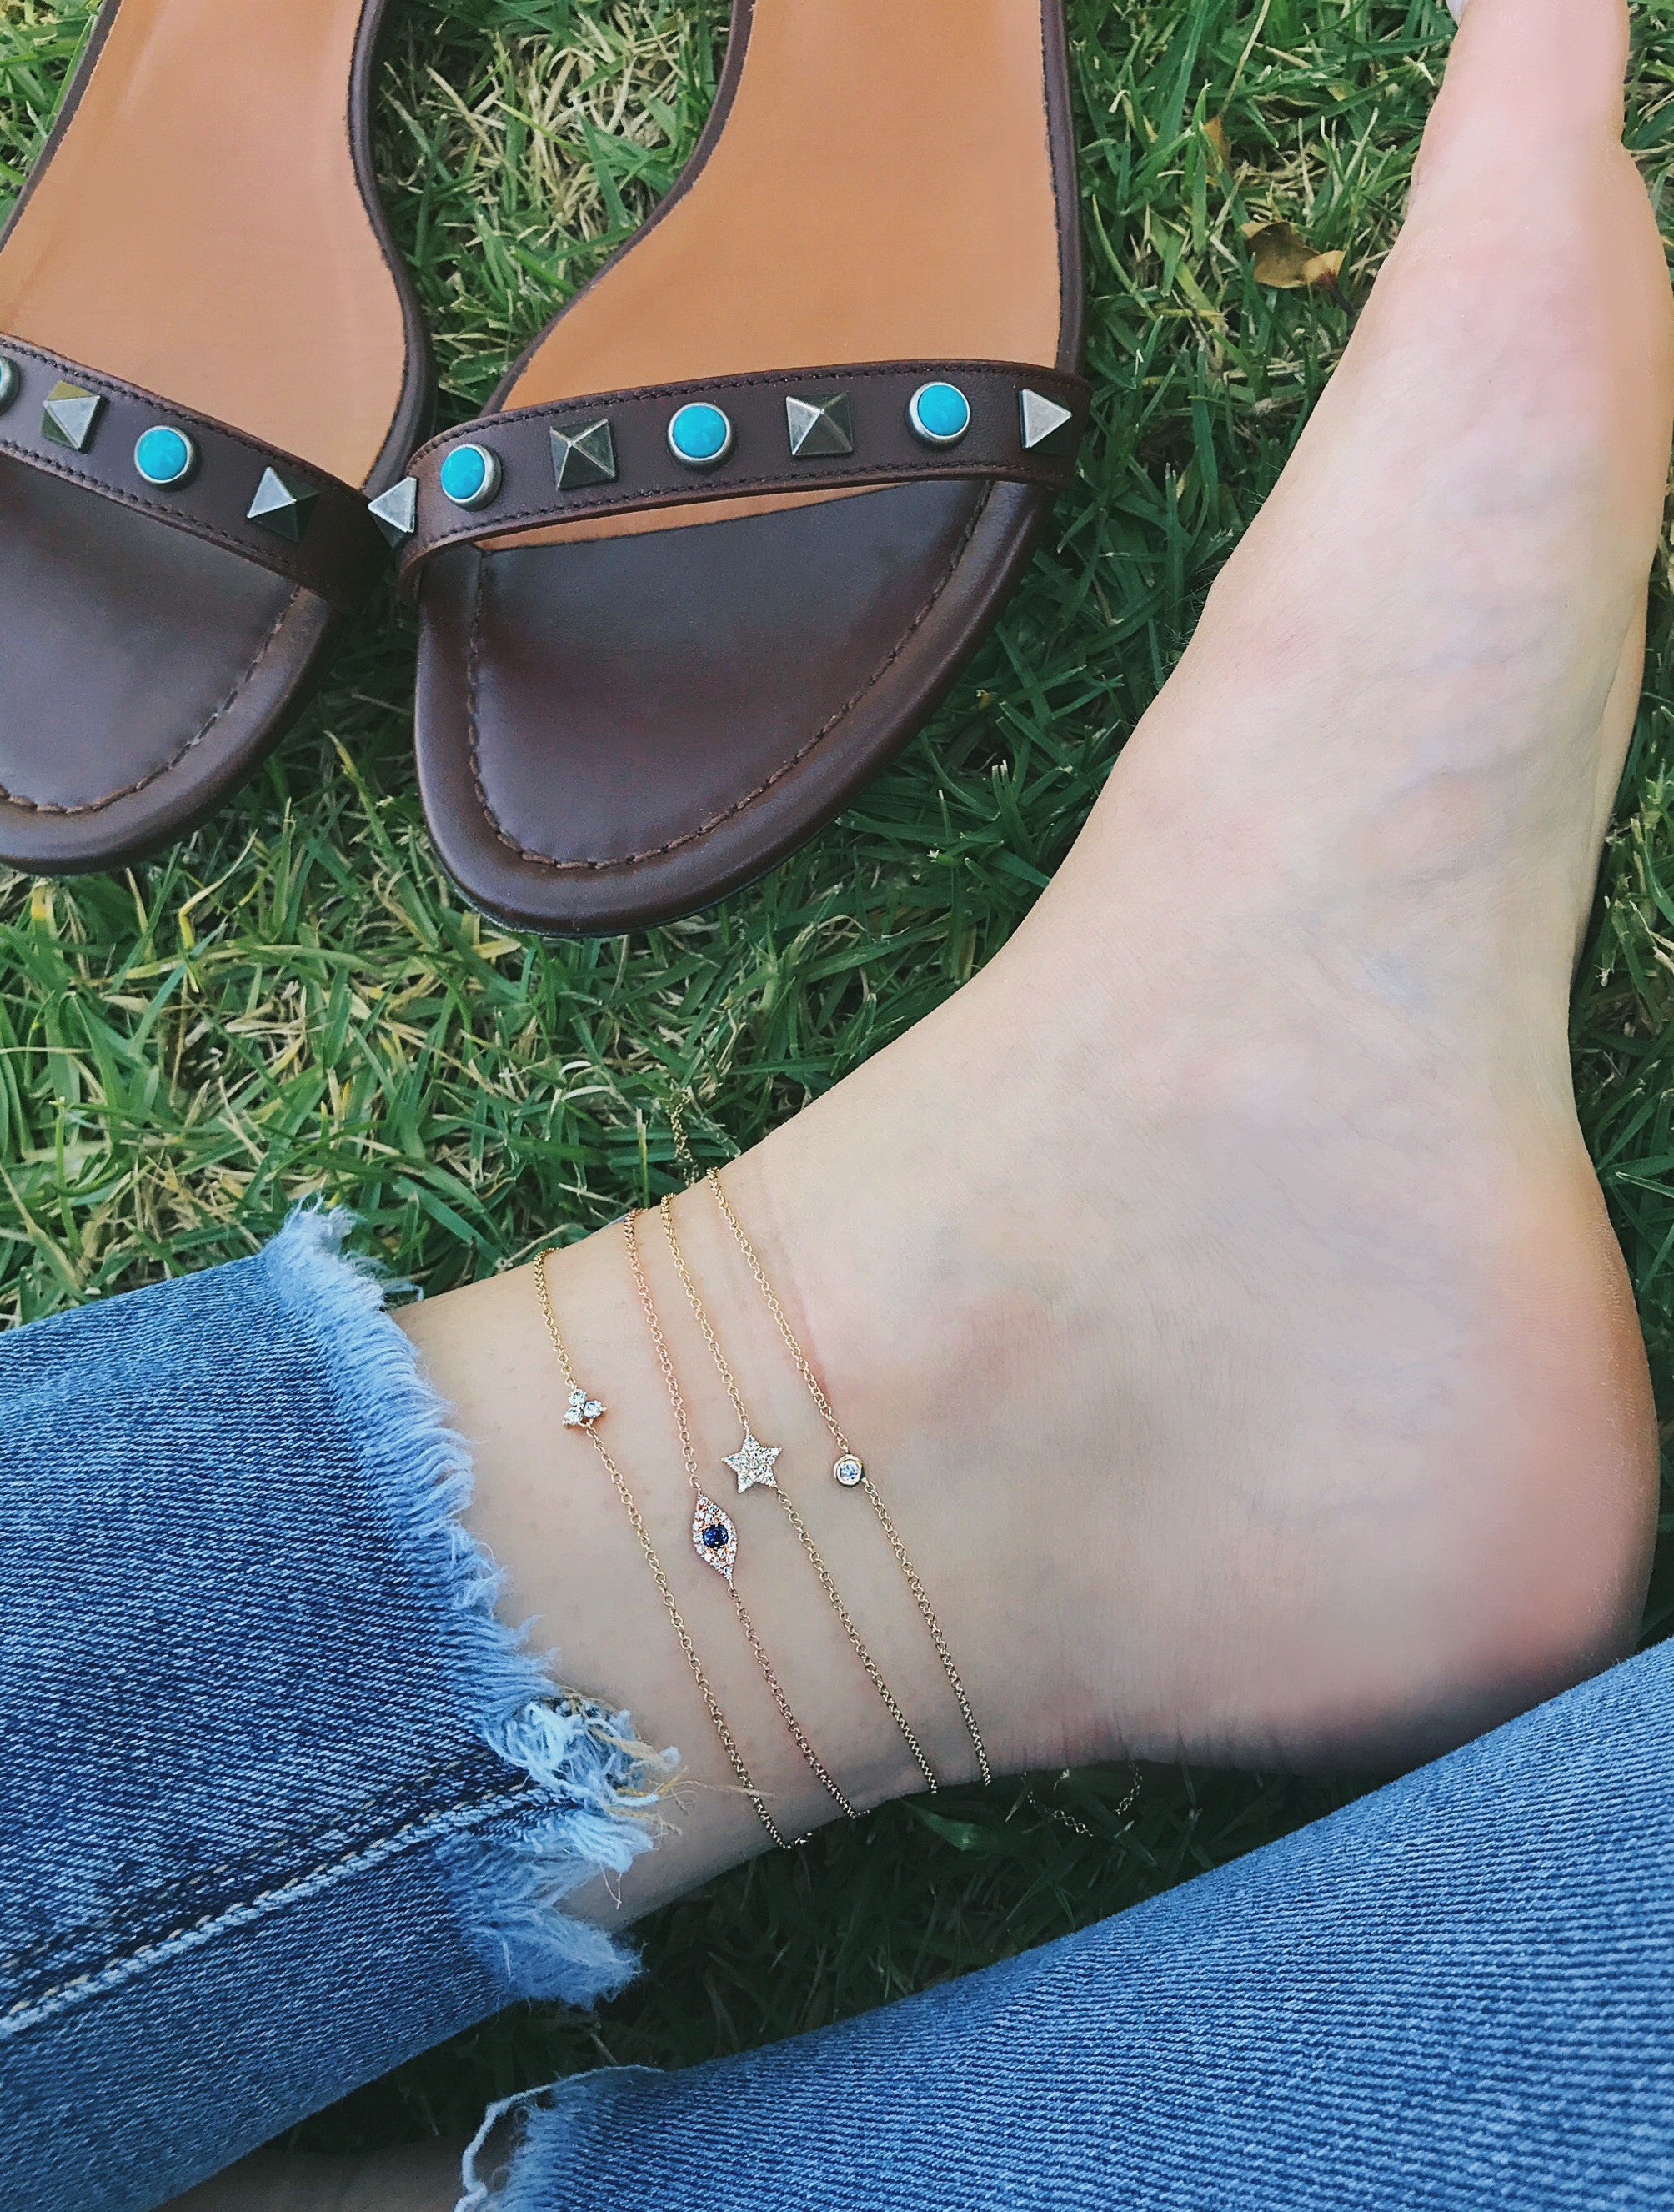 Diamond Evil Eye Anklet in 14k yellow gold styled on ankle of model with tree additional anklets